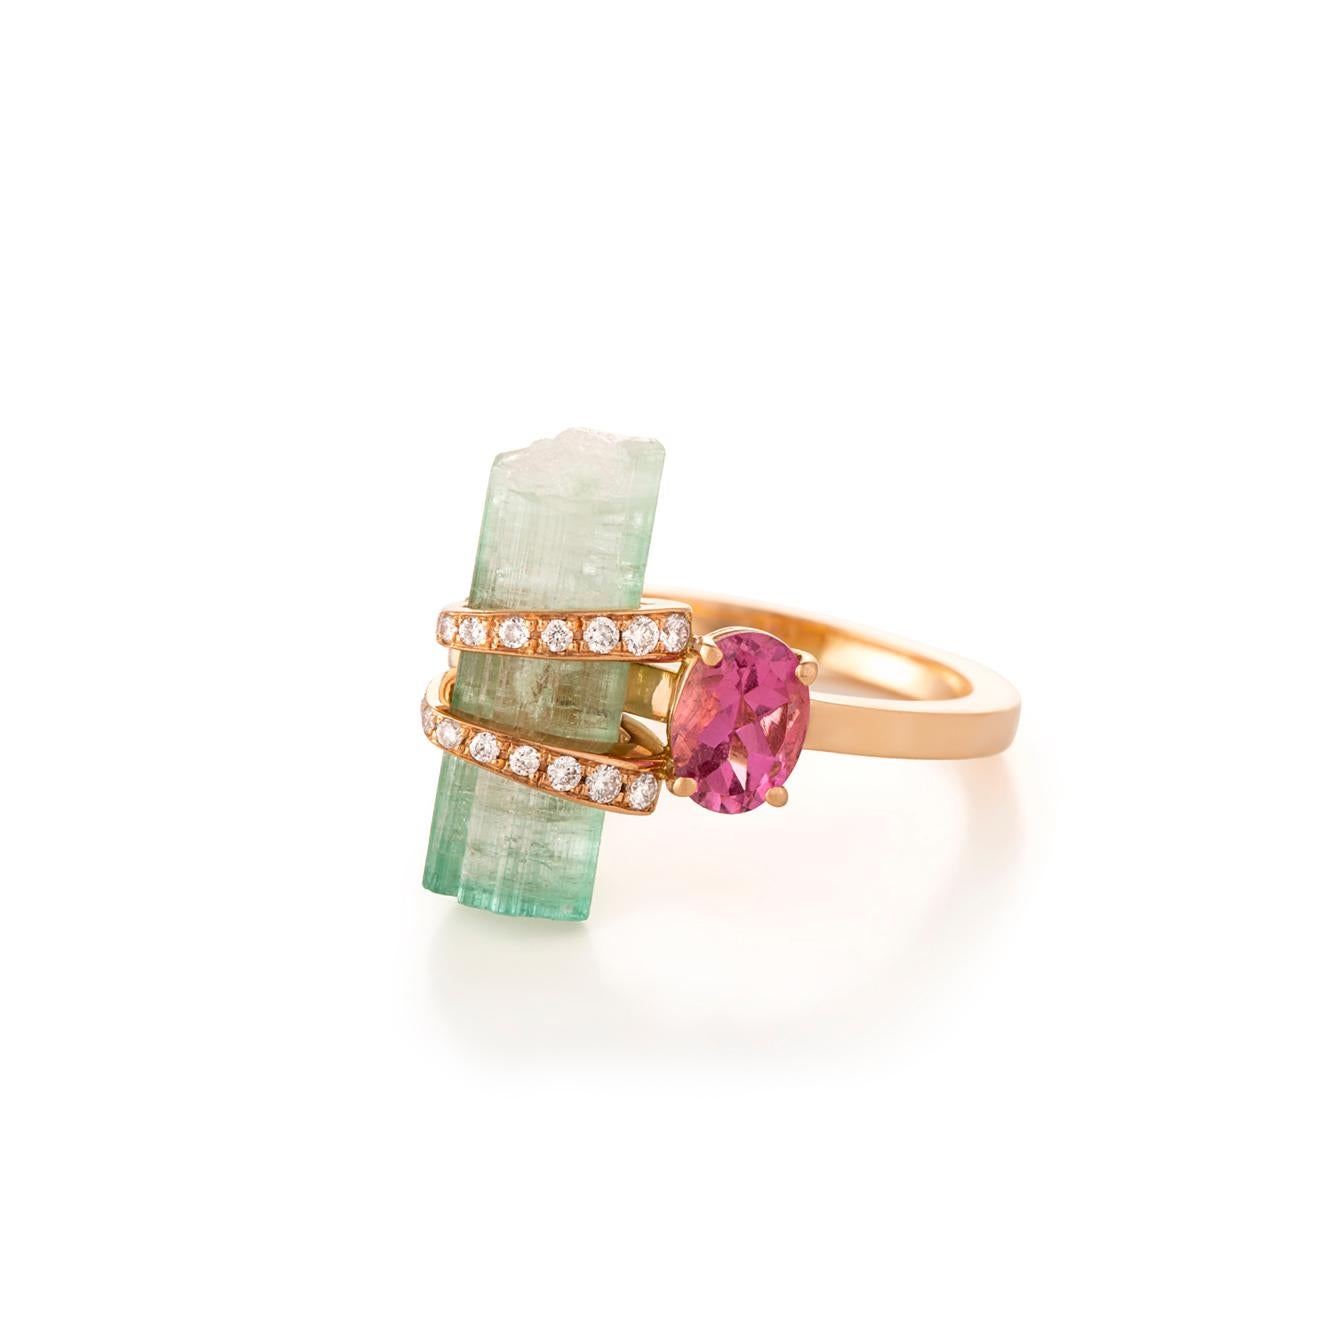 Clara's Chehab's fine jewellery celebrates the magic that is created when gifts from the earth are refined and transformed in the hands of master craftsmen and showcased in striking designs. The use of both rough and cut stone with a blend of